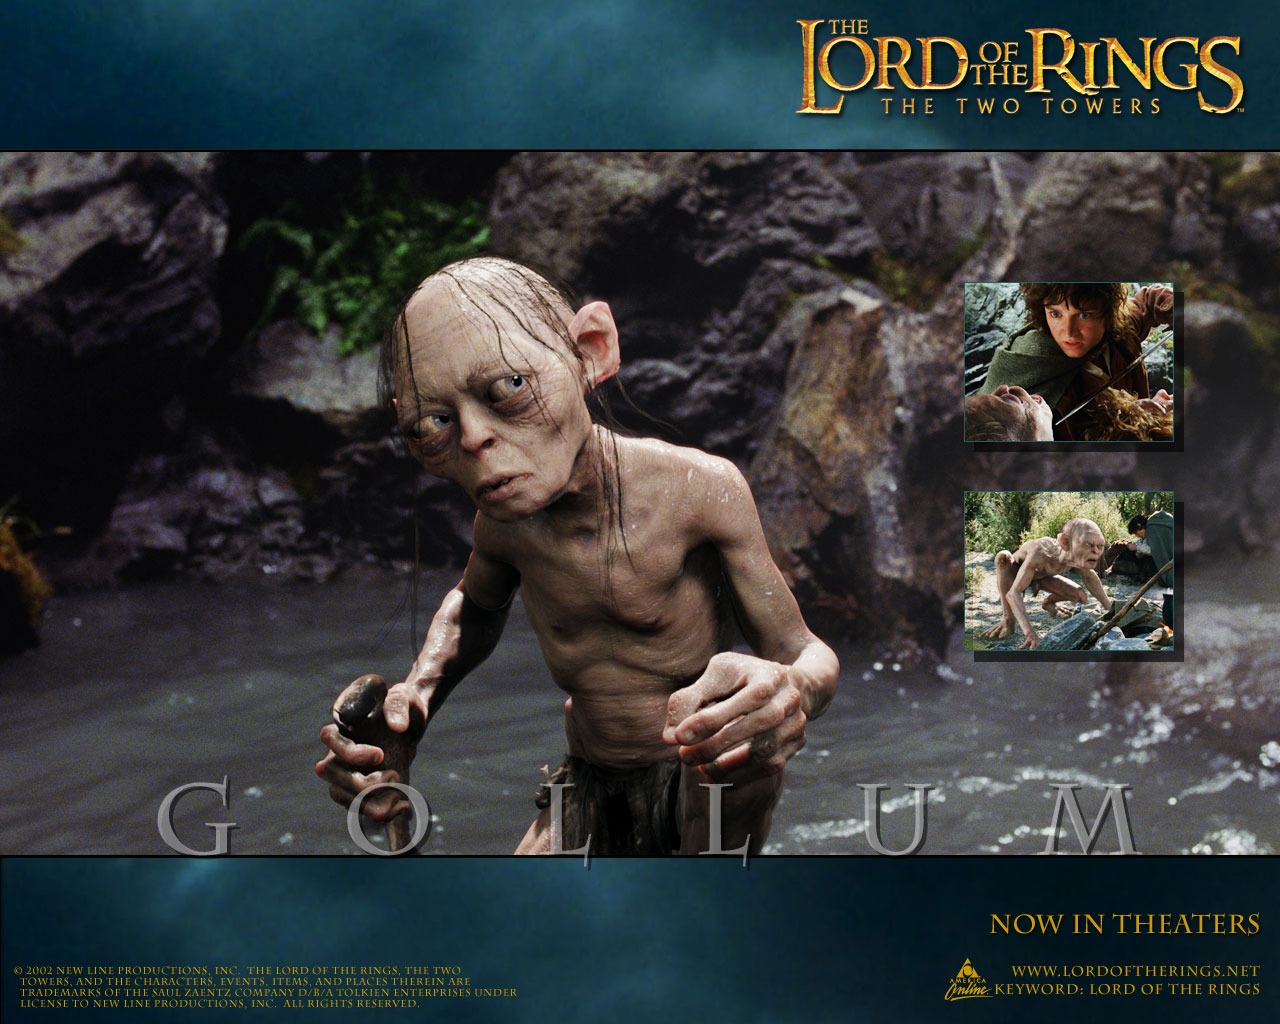 The Lord of the Rings wallpaper #10 - 1280x1024